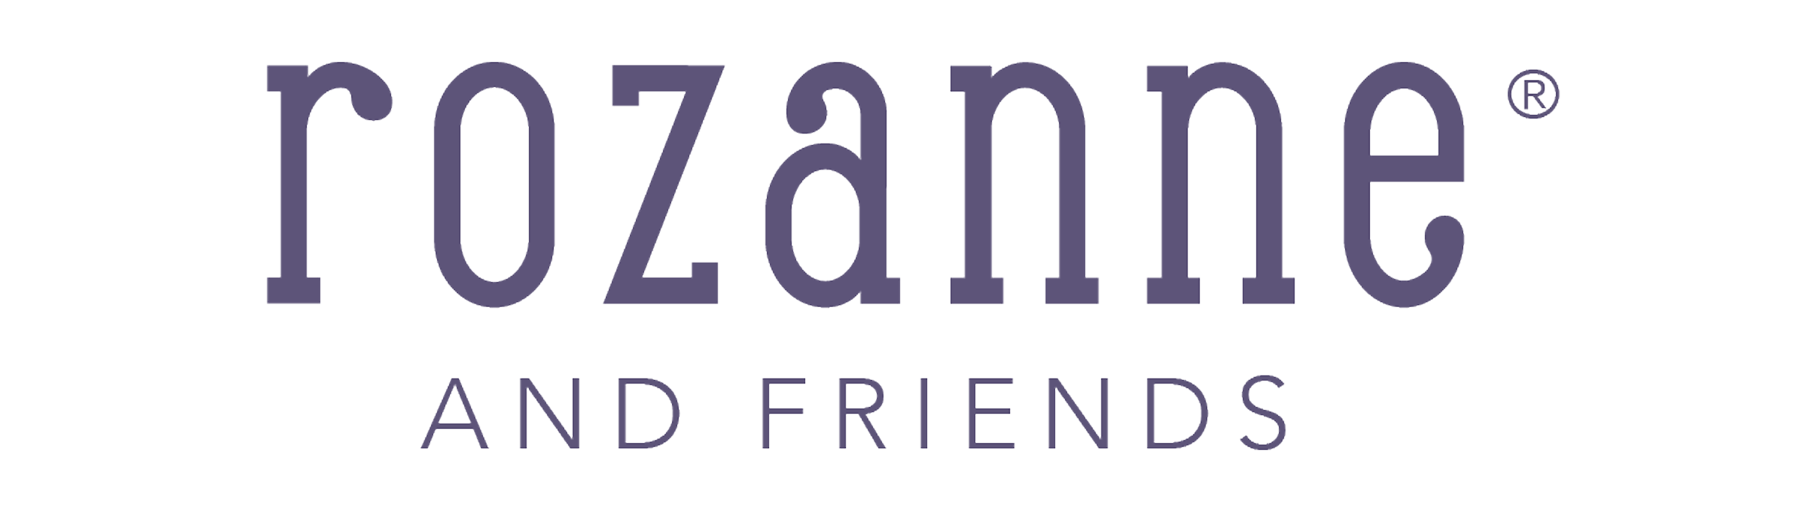 Flower and Friends Logo - Rozanne® & Friends: Discover New Flowers, Planting Tips & More